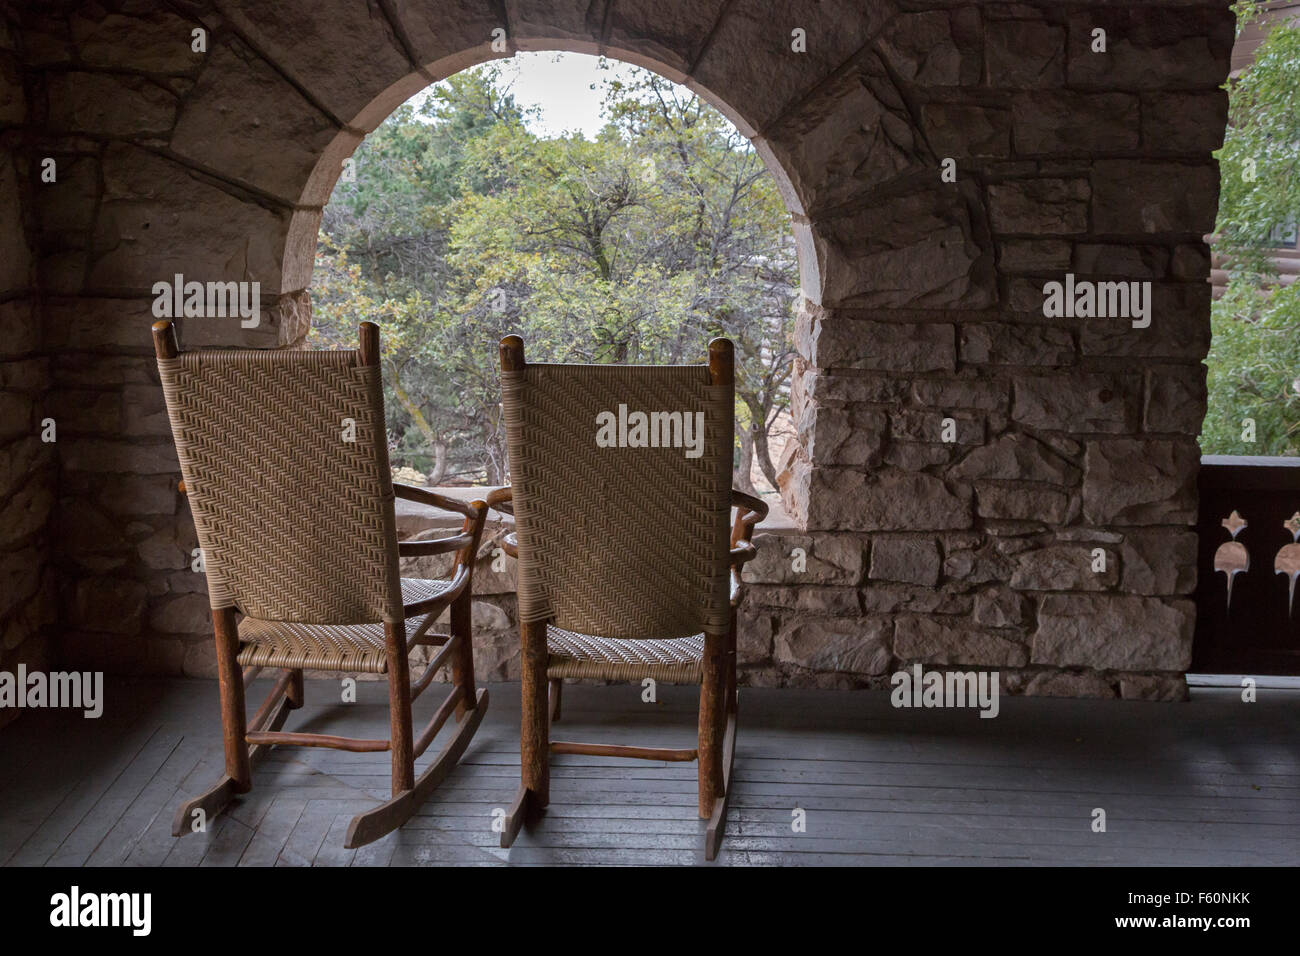 Grand Canyon National Park, Arizona - Rocking chairs on the porch of El Tovar Hotel. Stock Photo